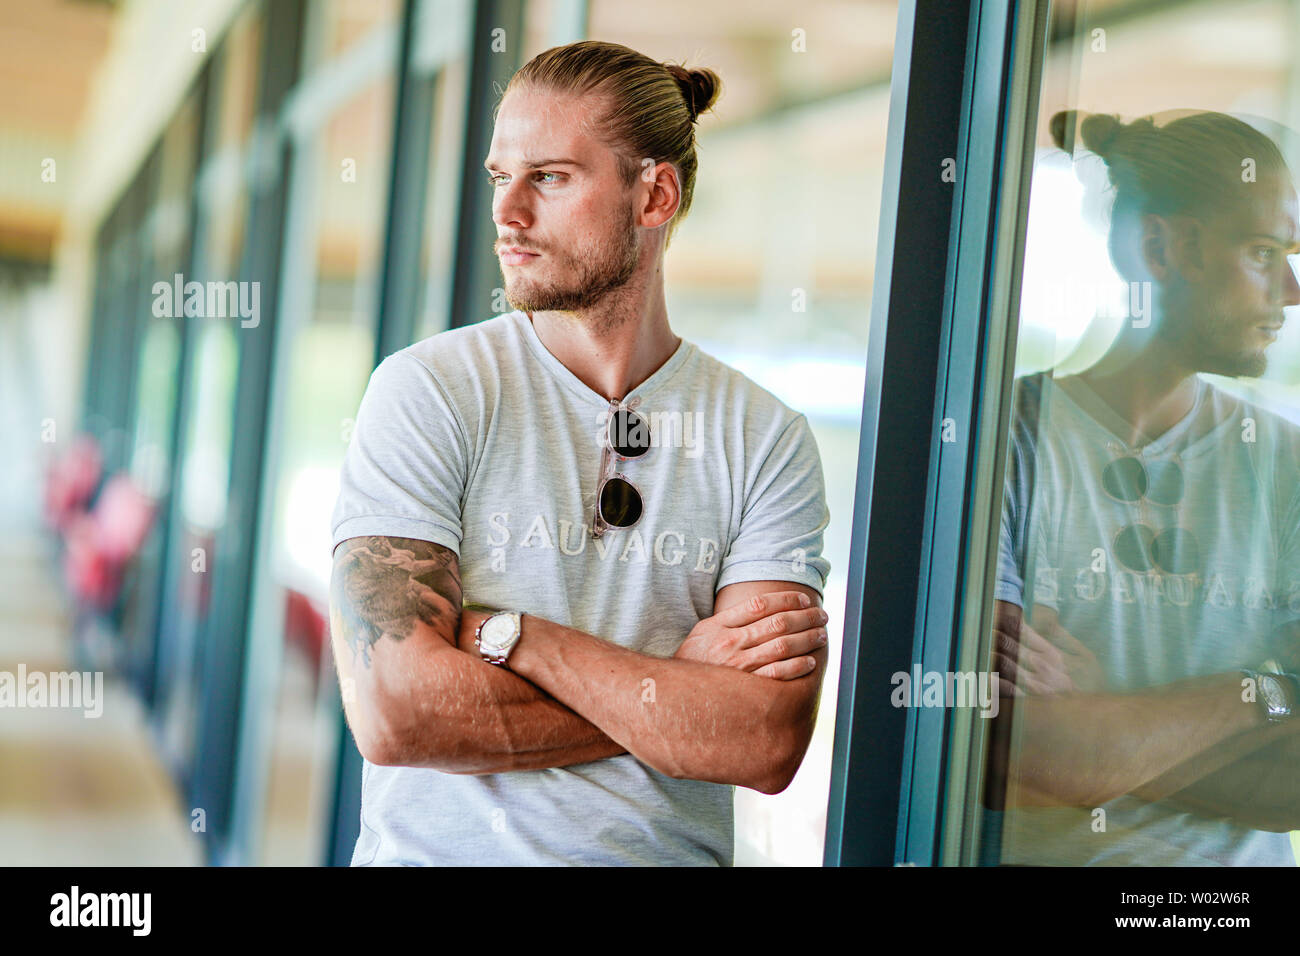 Sandhausen, Germany. 25th June, 2019. Rurik Gislason, player of the second division soccer team SV Sandhausen, is standing on the stadium grandstand. Gislason from SV Sandhausen became world famous a year ago. Not because he delivered sensational performances for Iceland at the World Cup in Russia, but because of his appearance. (to dpa 'One year after the hype: The new life of the 'beautiful' Rurik Gislason') Credit: Uwe Anspach/dpa/Alamy Live News Stock Photo